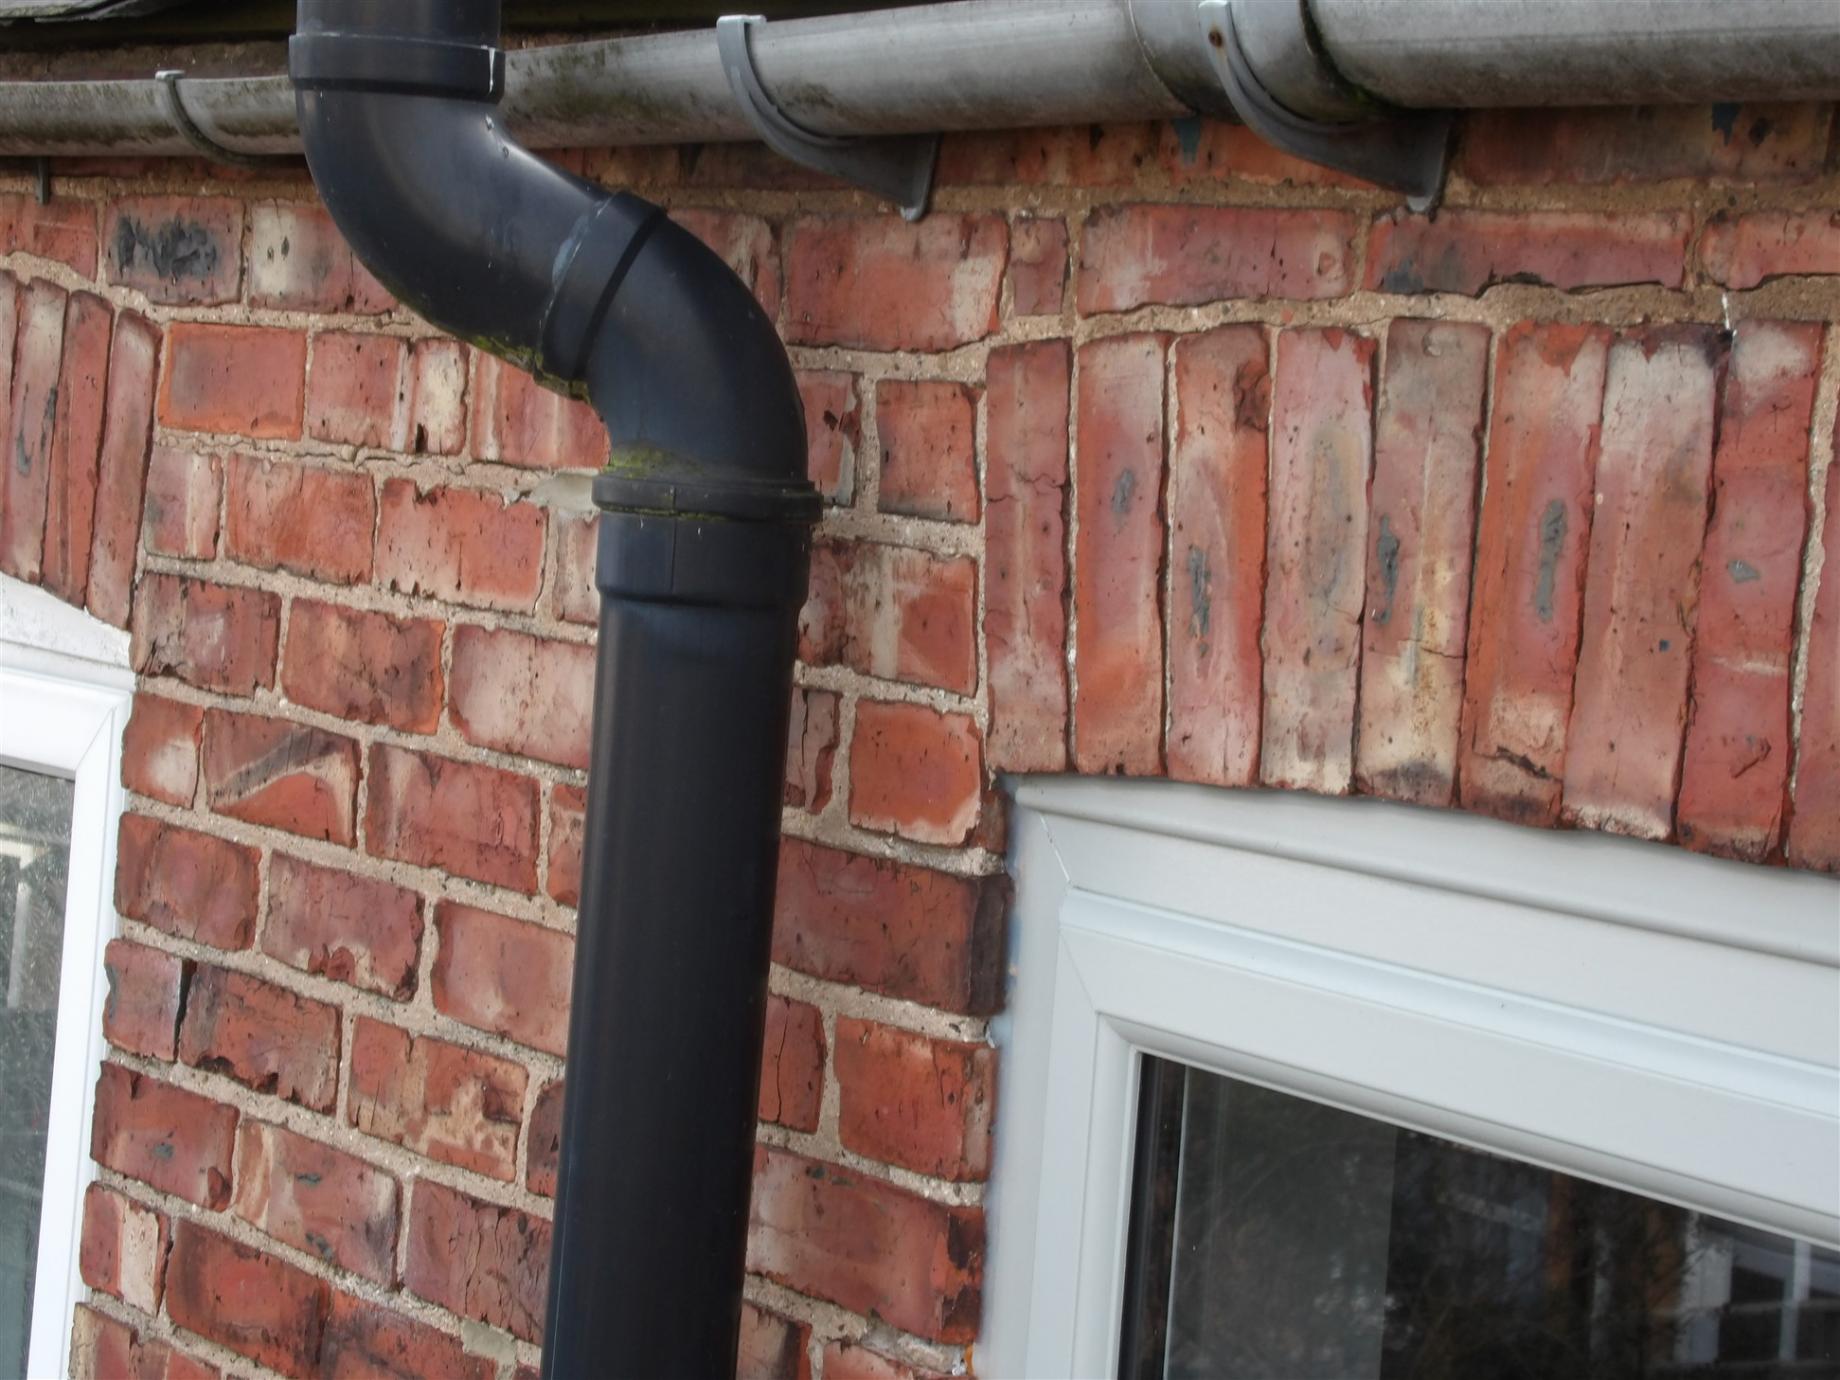 Can you spot the horizontal mortar joint crack indication cavity wall tie failure?